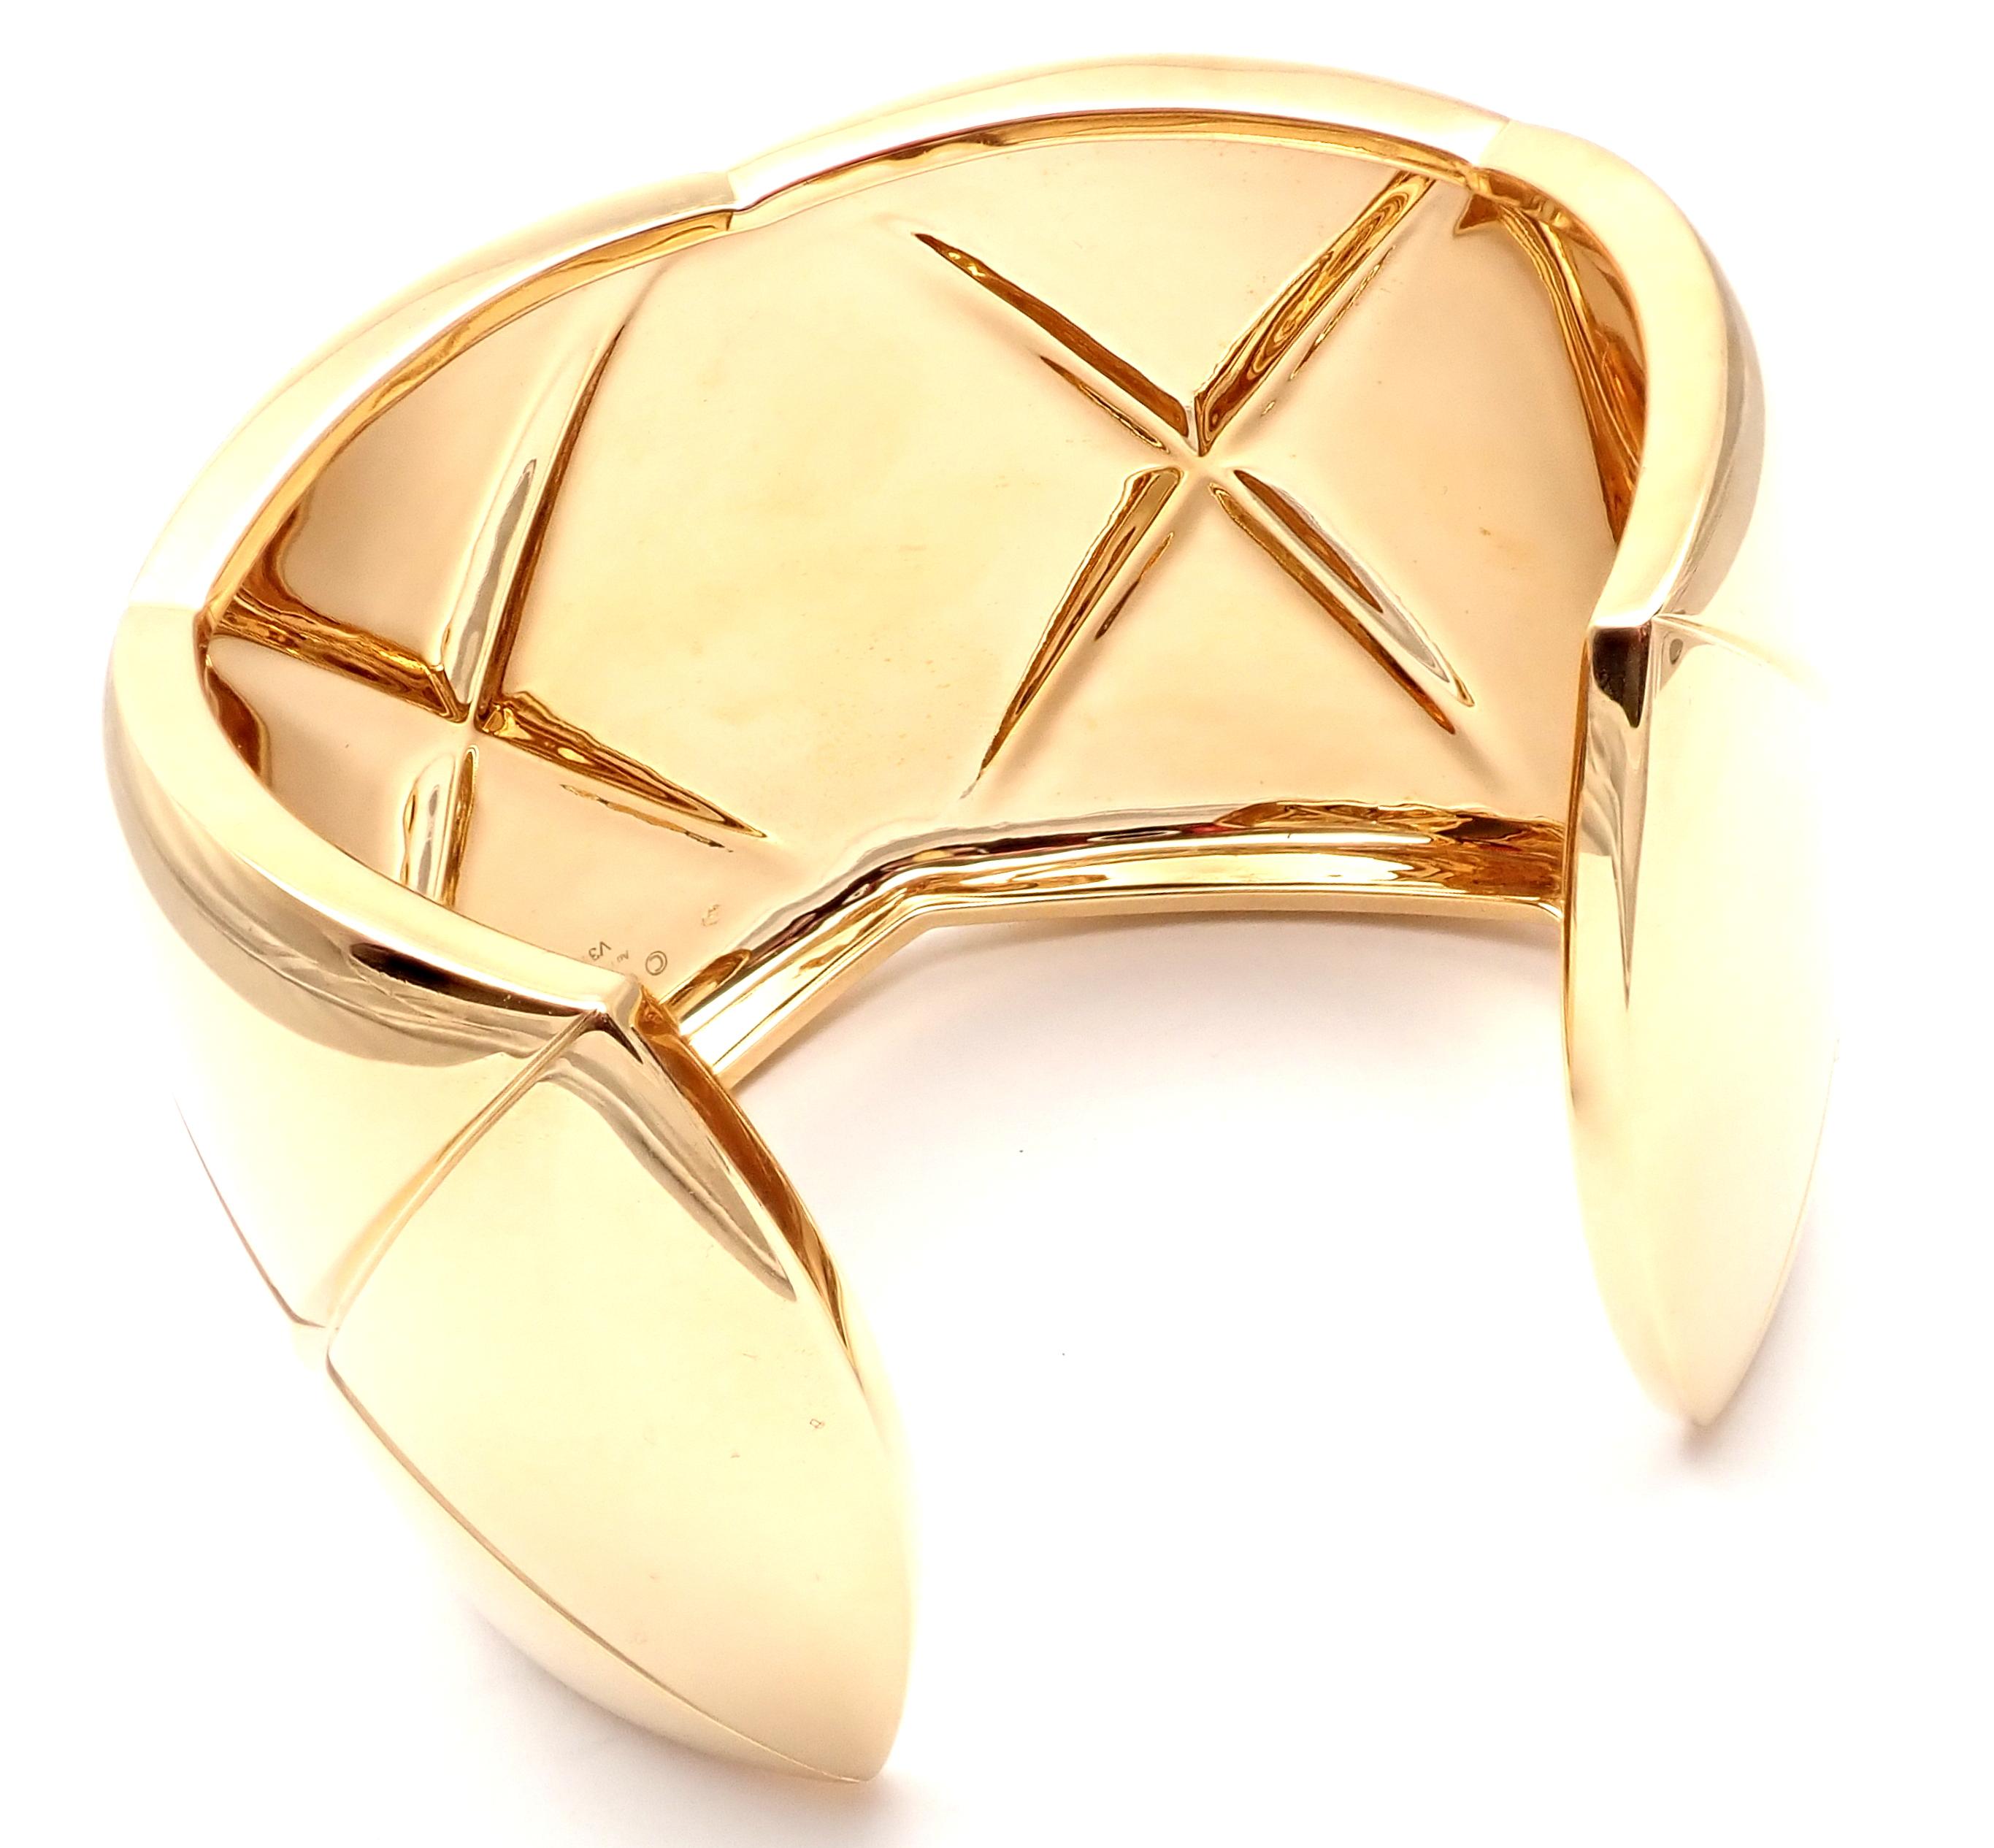 Chanel Coco Crush Yellow Gold Cuff Bangle Bracelet For Sale 1